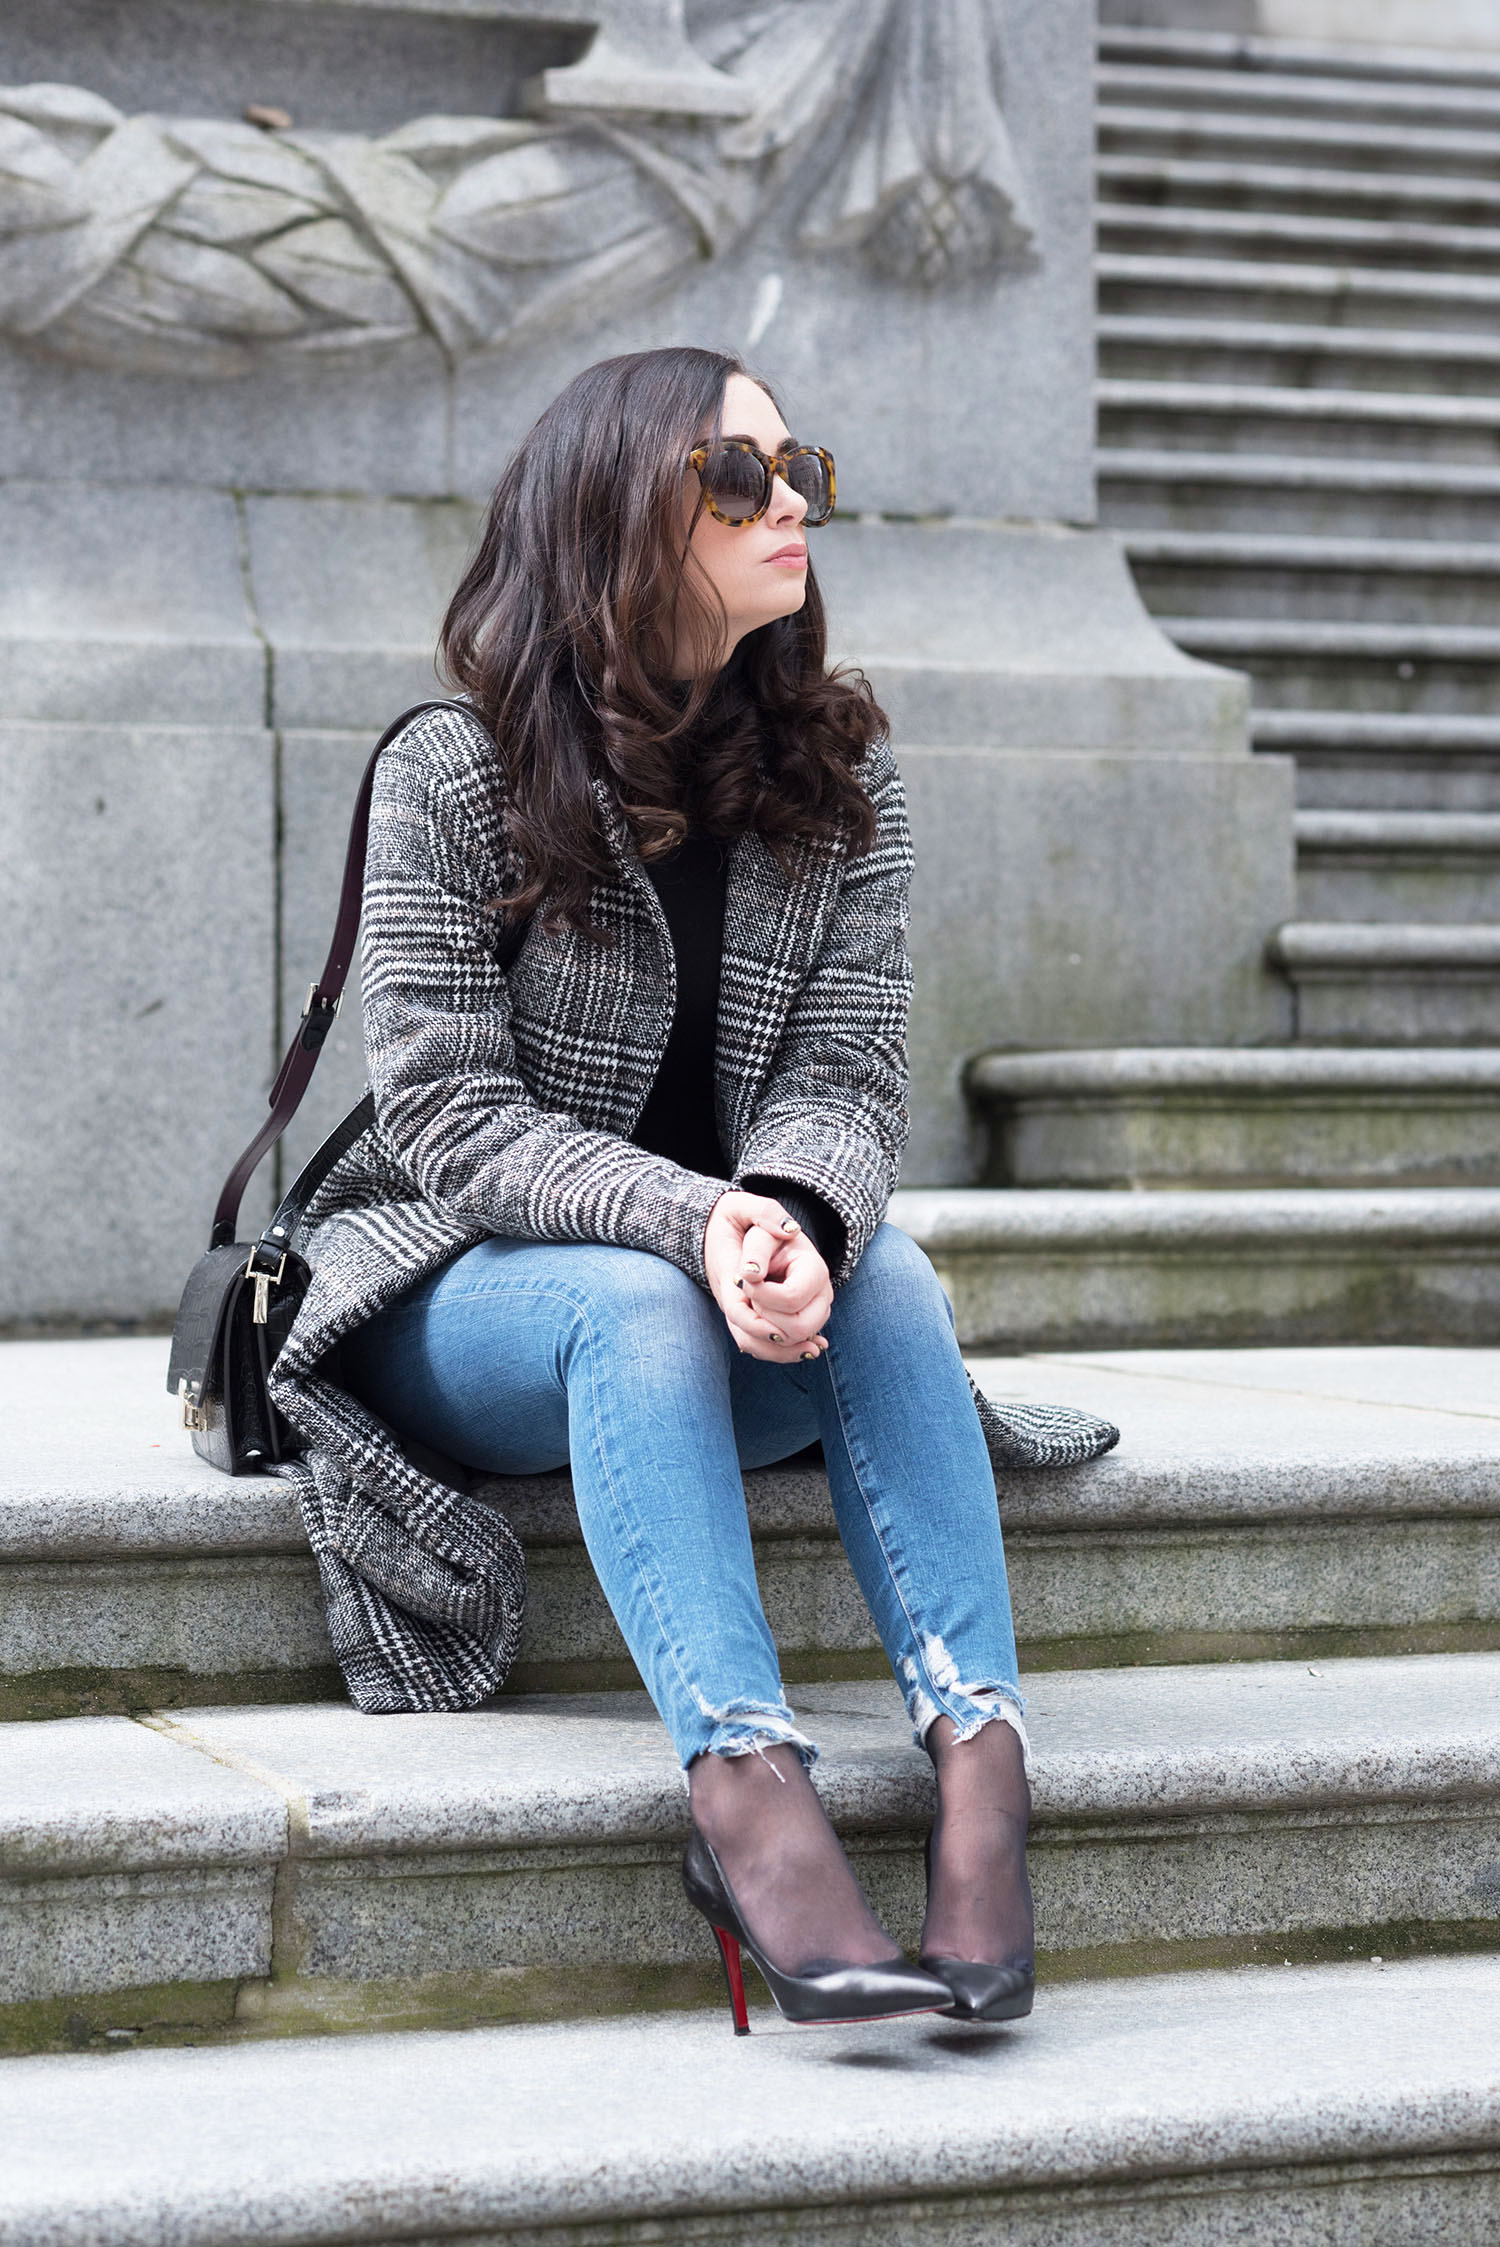 Winnipeg fashion blogger Cee Fardoe of Coco & Vera at the Vancouver Art Gallery, wearing a Sheinside checked coat and Mavi pearl jeans